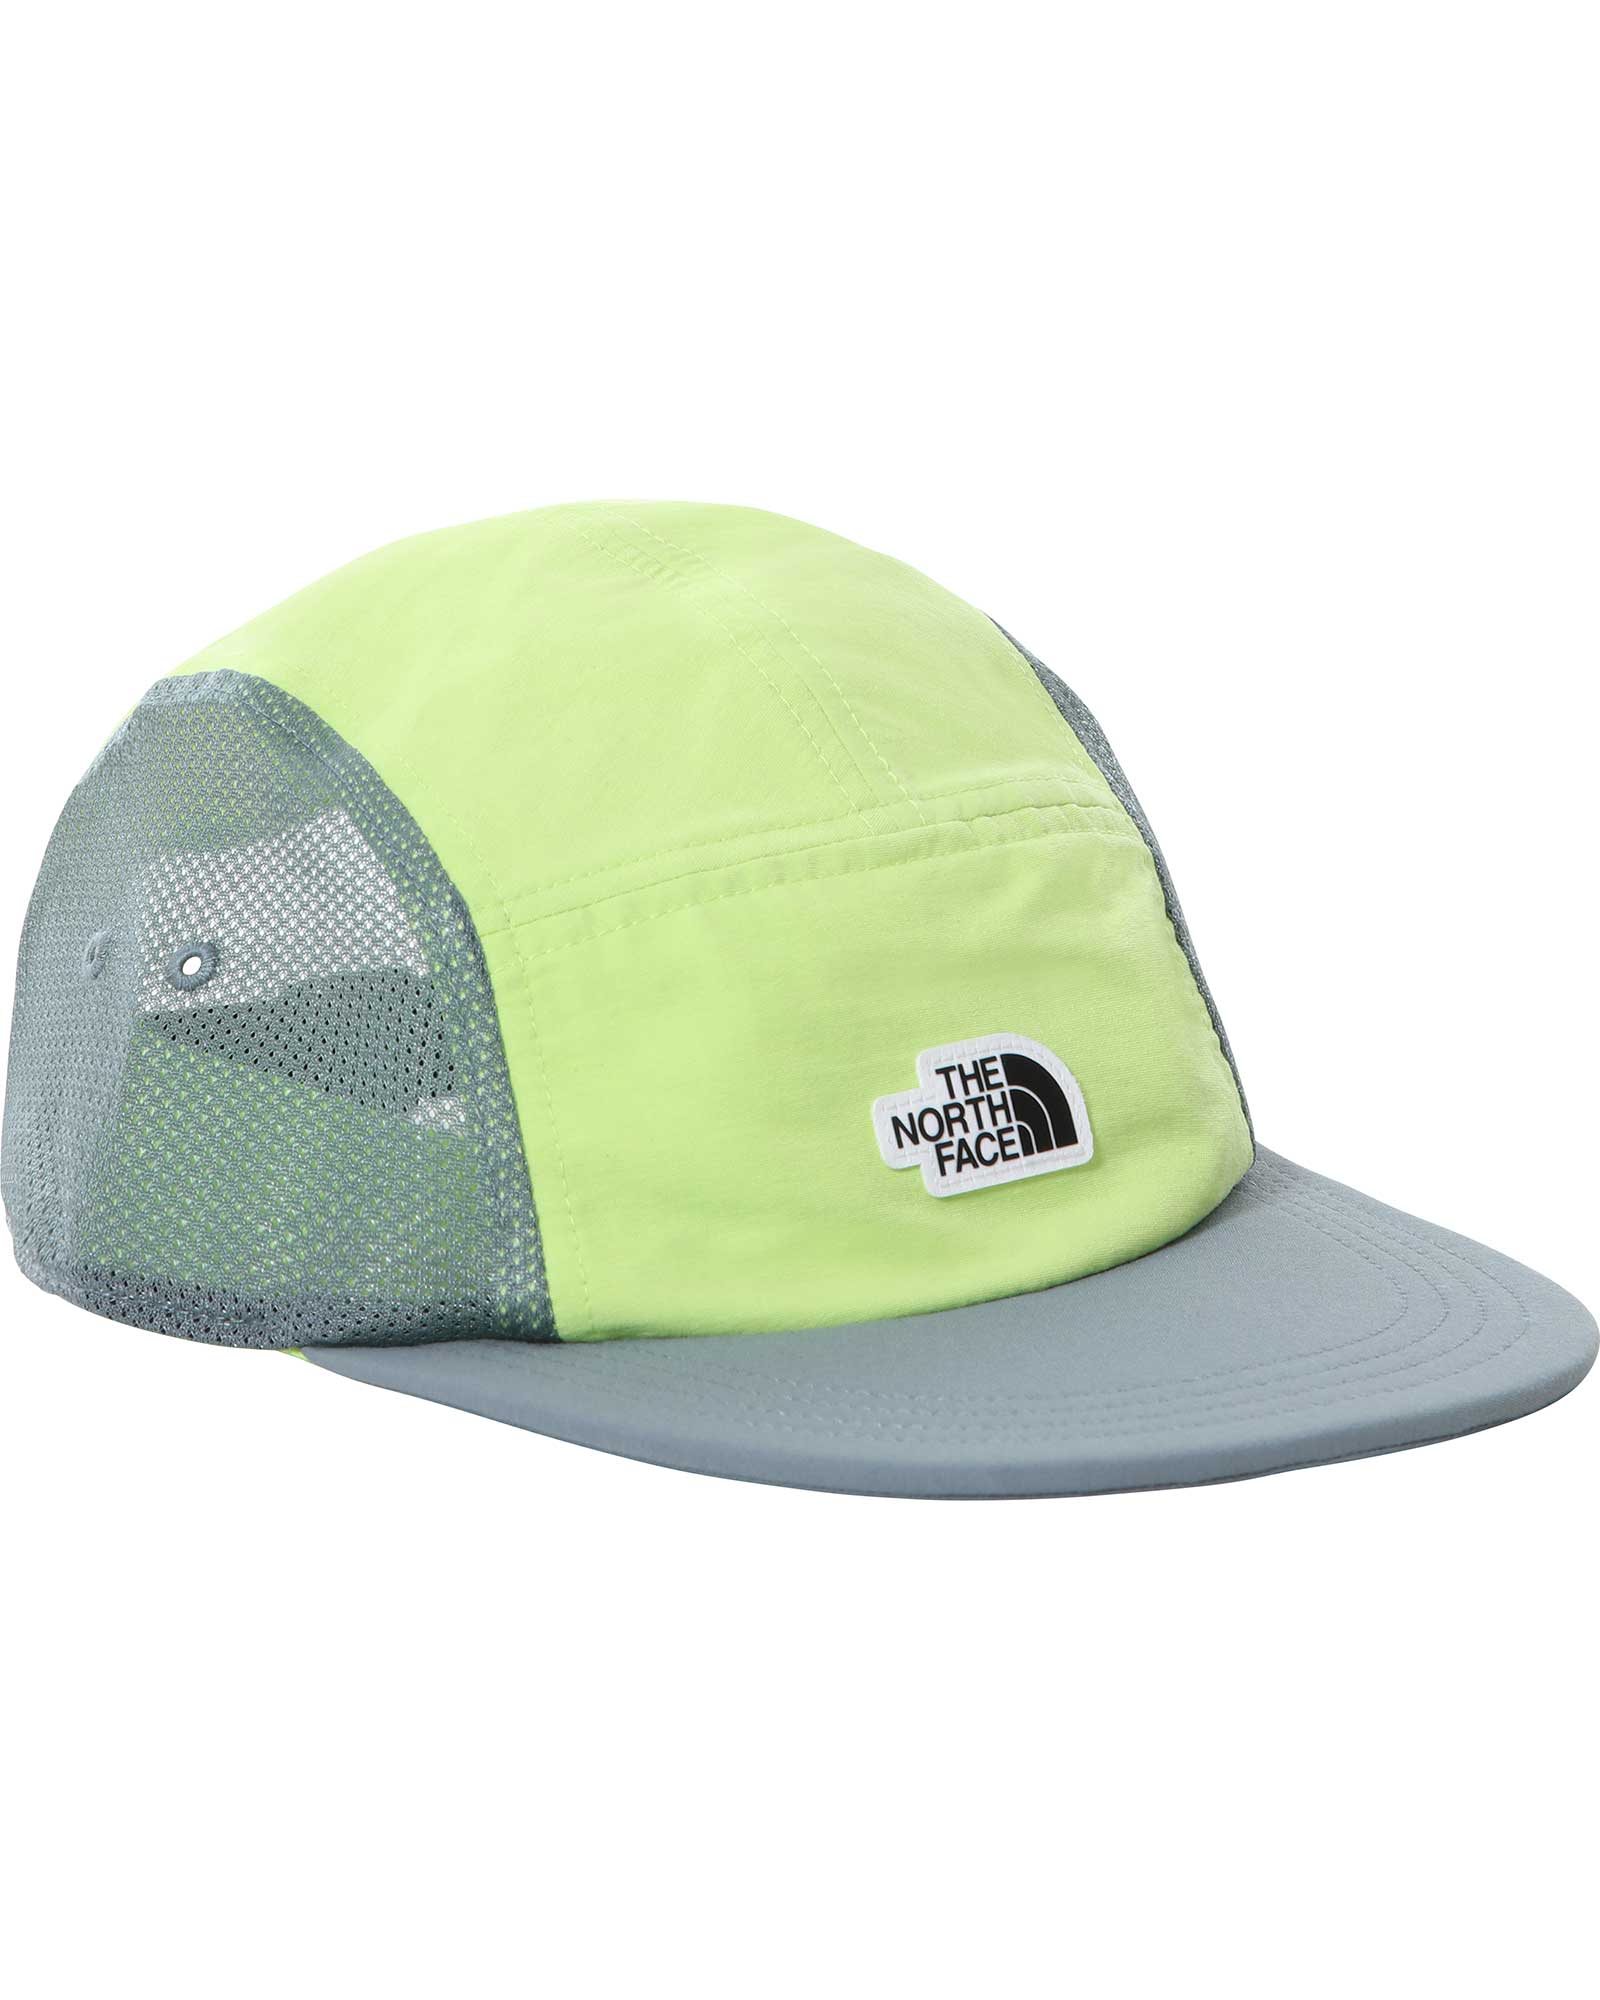 The North Face Class V Camp Hat - Goblin Blue/Sharp Green